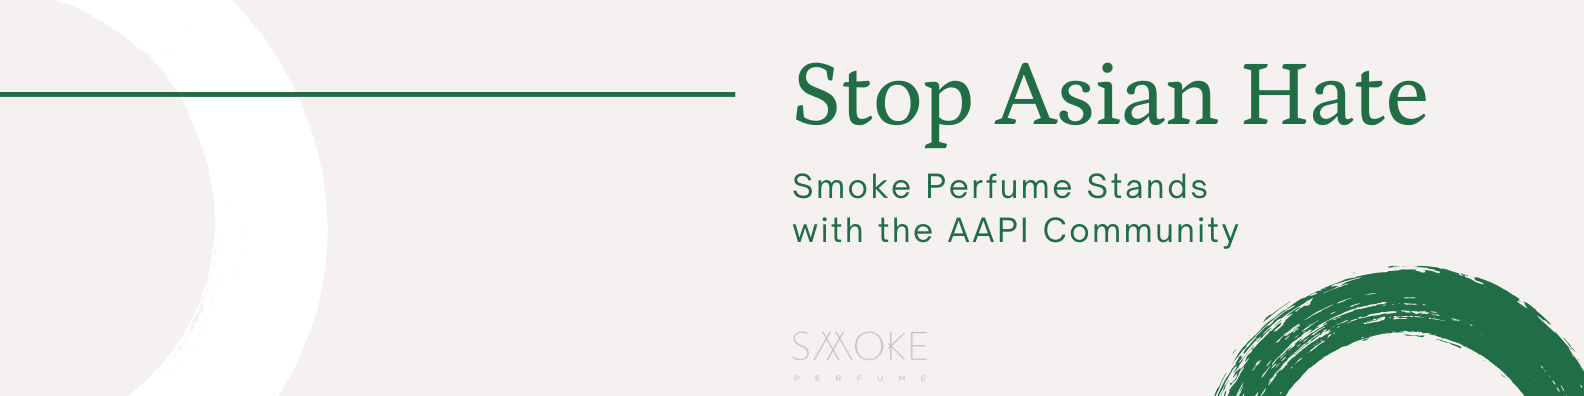 Stop Asian Hate: Smoke Perfume Stands with the AAPI Community